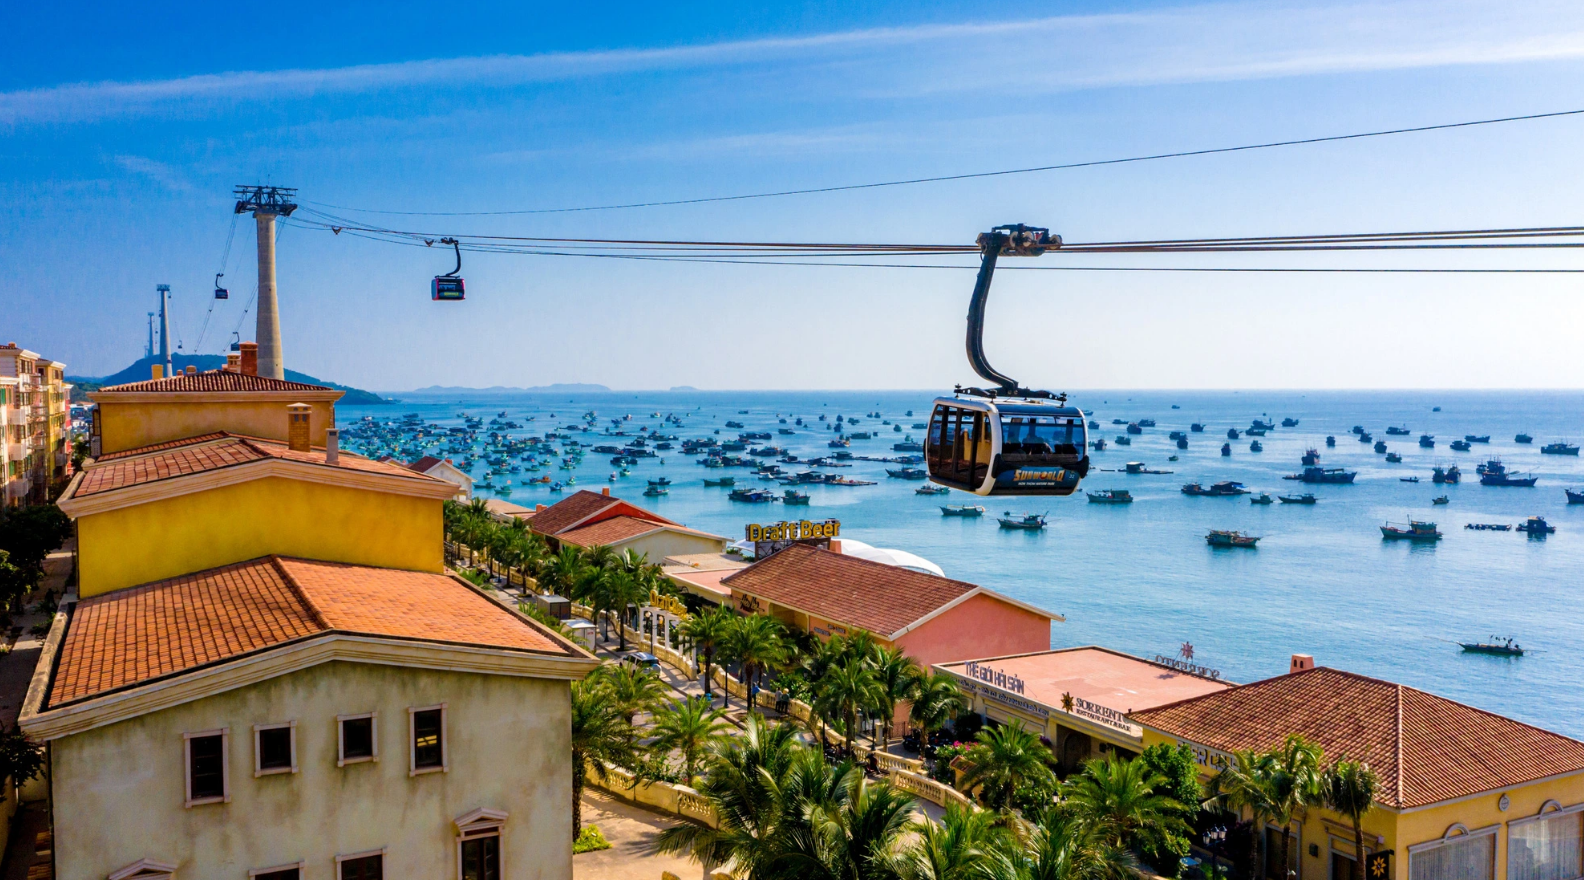 The Hon Thom (Pineapple Islet) sea cable car link on Phu Quoc Island is the longest of its kind in Vietnam, making life easier for tourists to admire the panoramic view over the island. Photo: Supplied